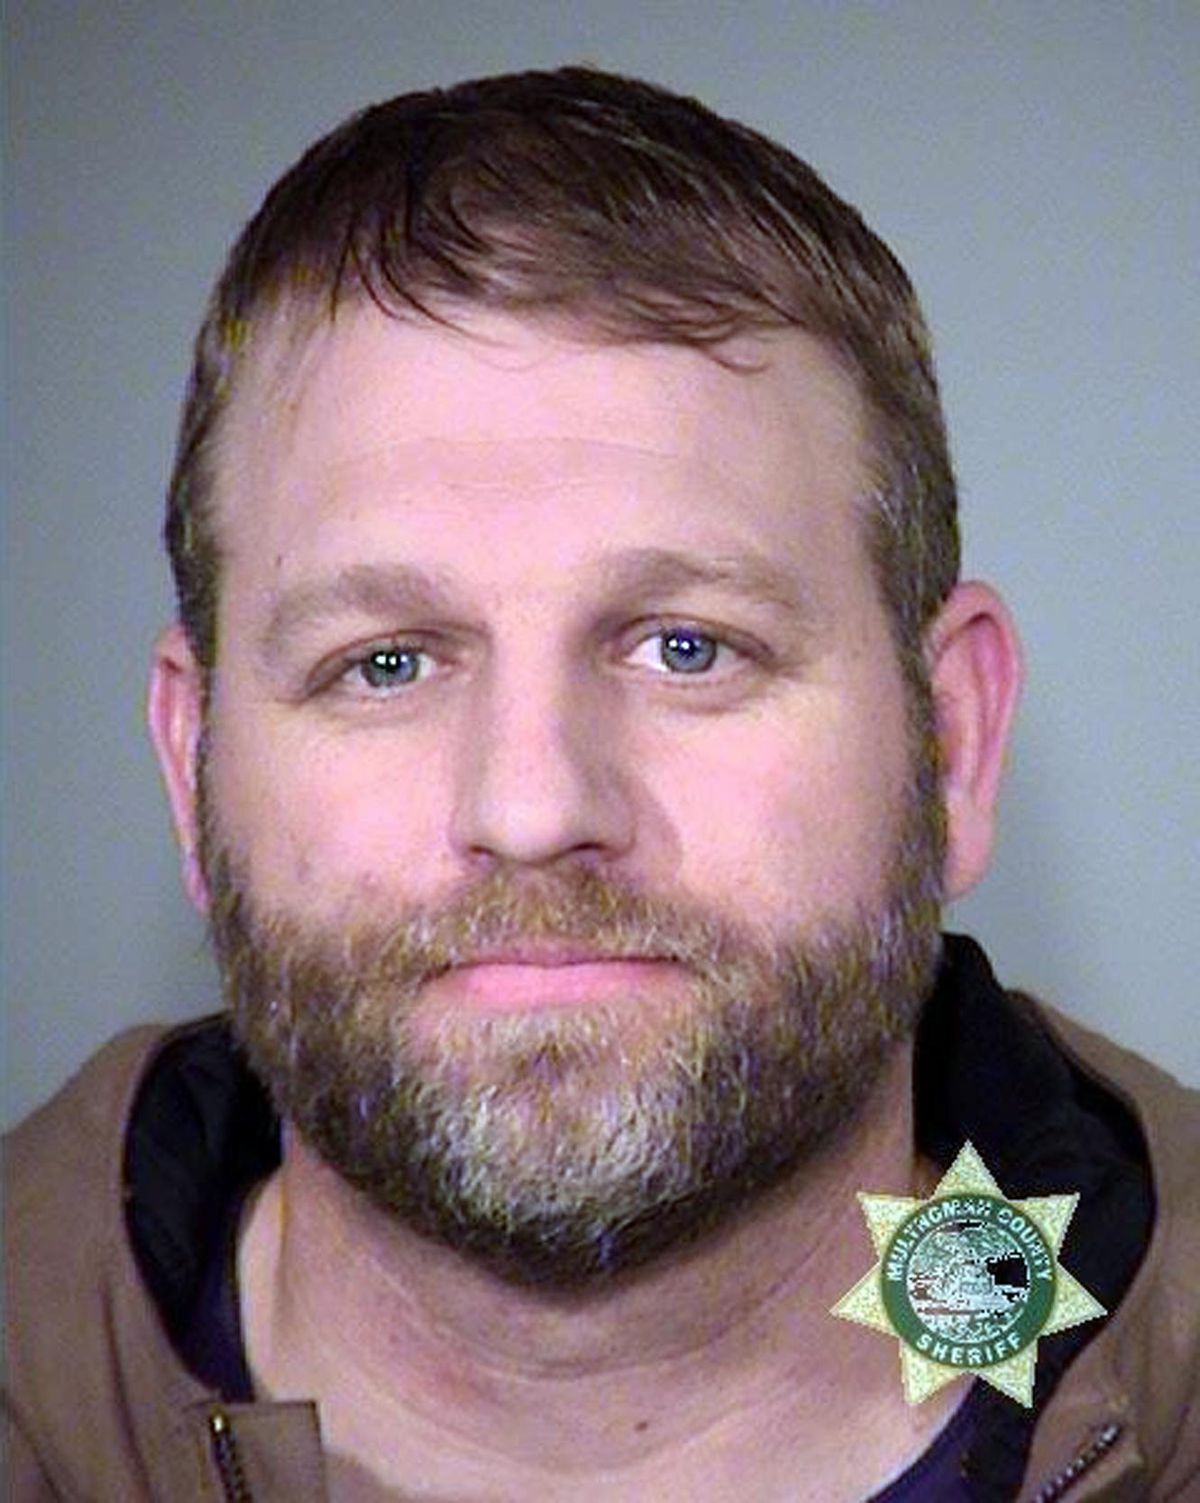 This Jan. 27, 2016 photo provided by the Multnomah County Sheriff